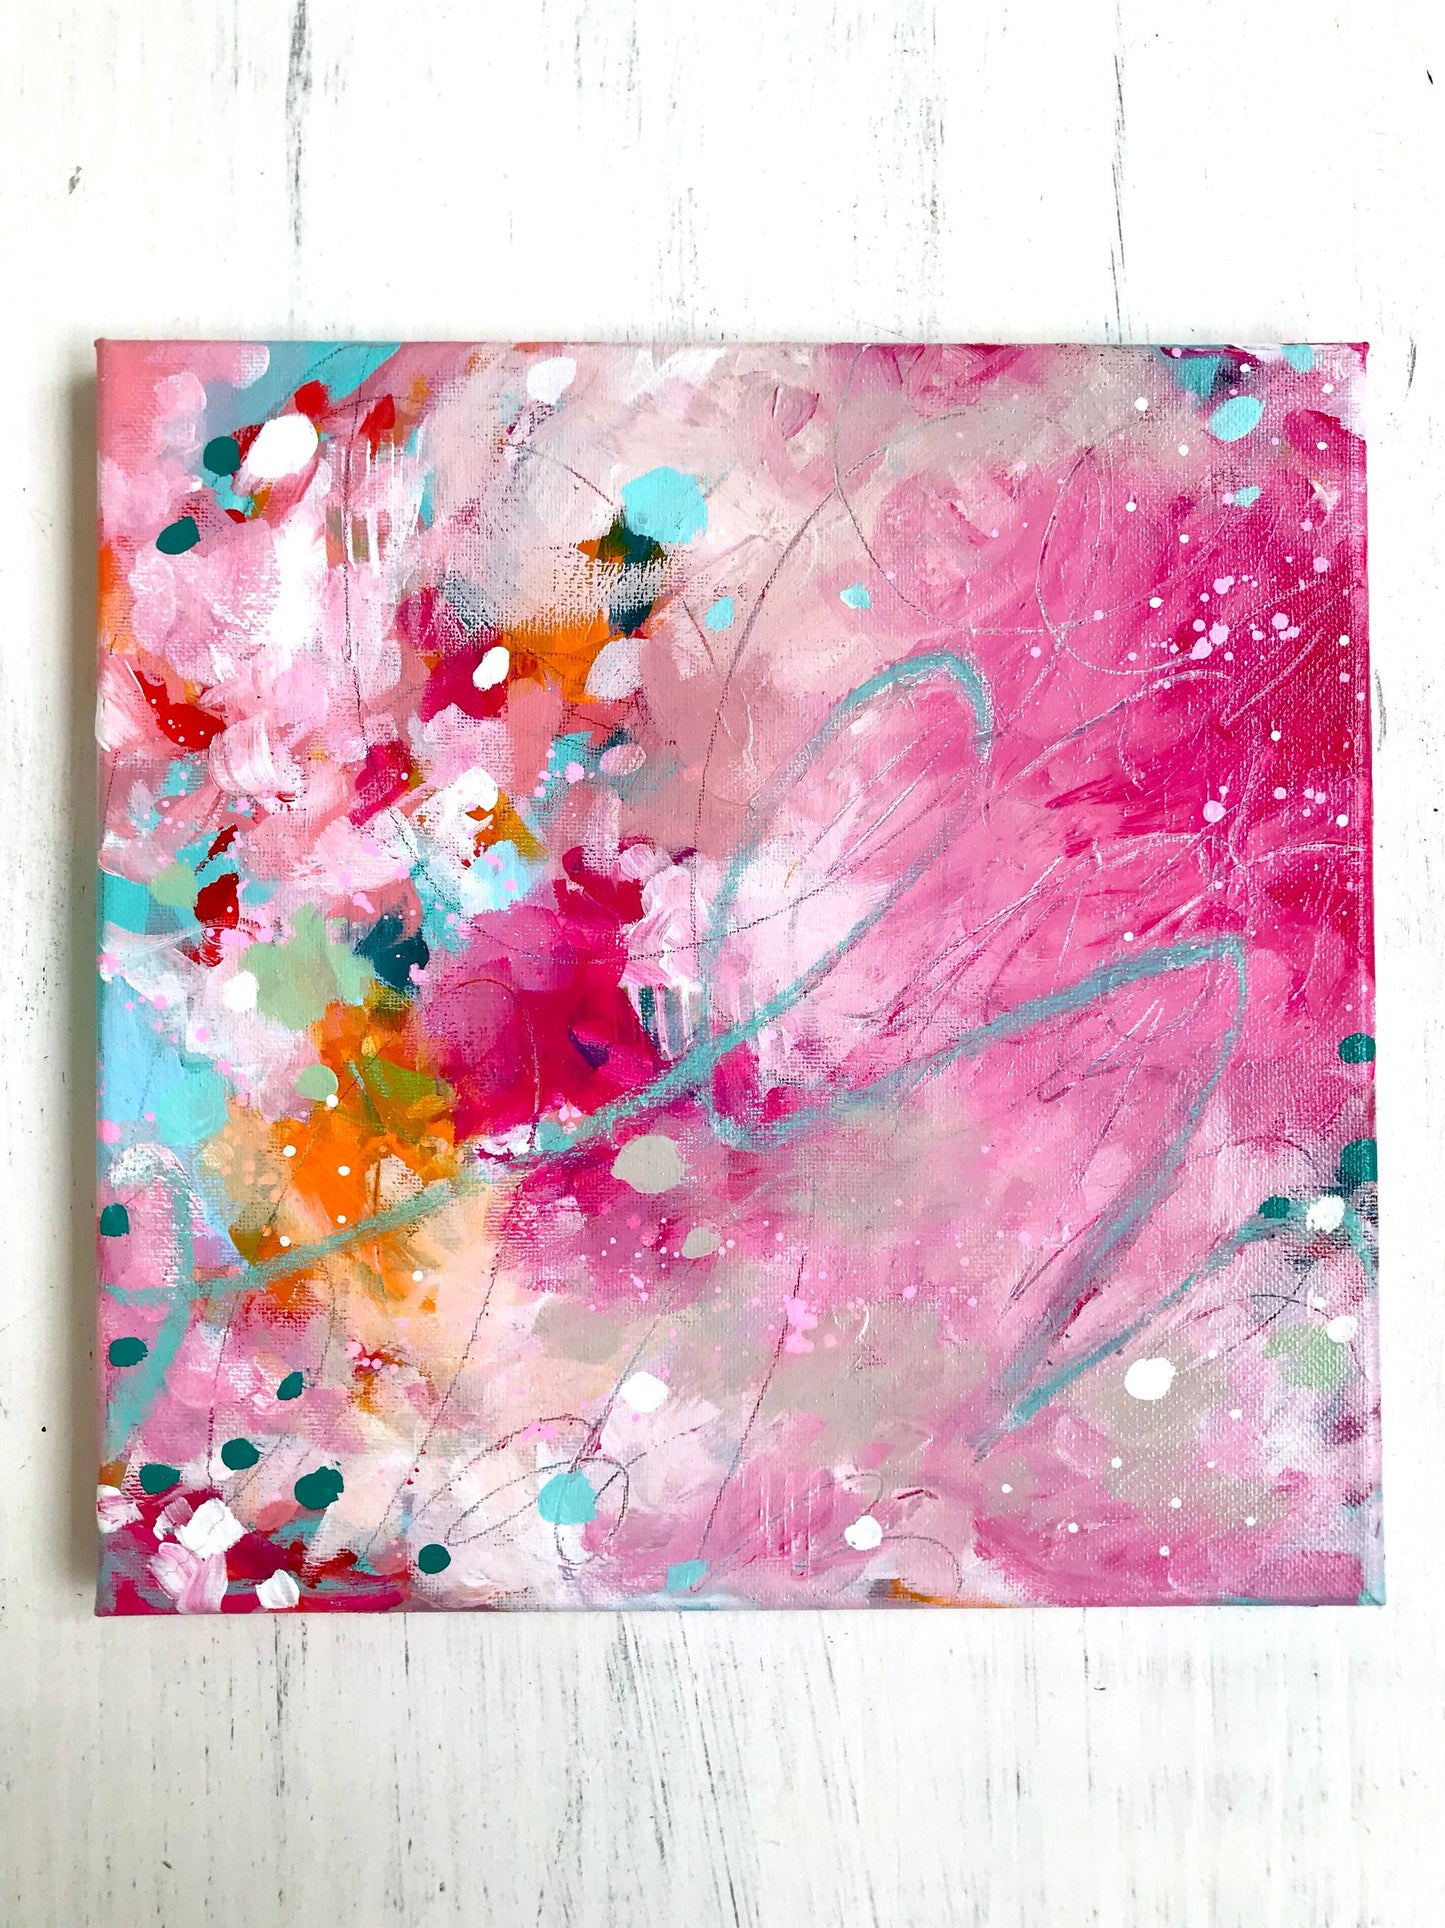 Original Abstract Painting on 10x10 inch Canvas / Acrylic and Pastel / "Pretty in Pink" / Pink Painting / Colorful Home Decor - Bethany Joy Art